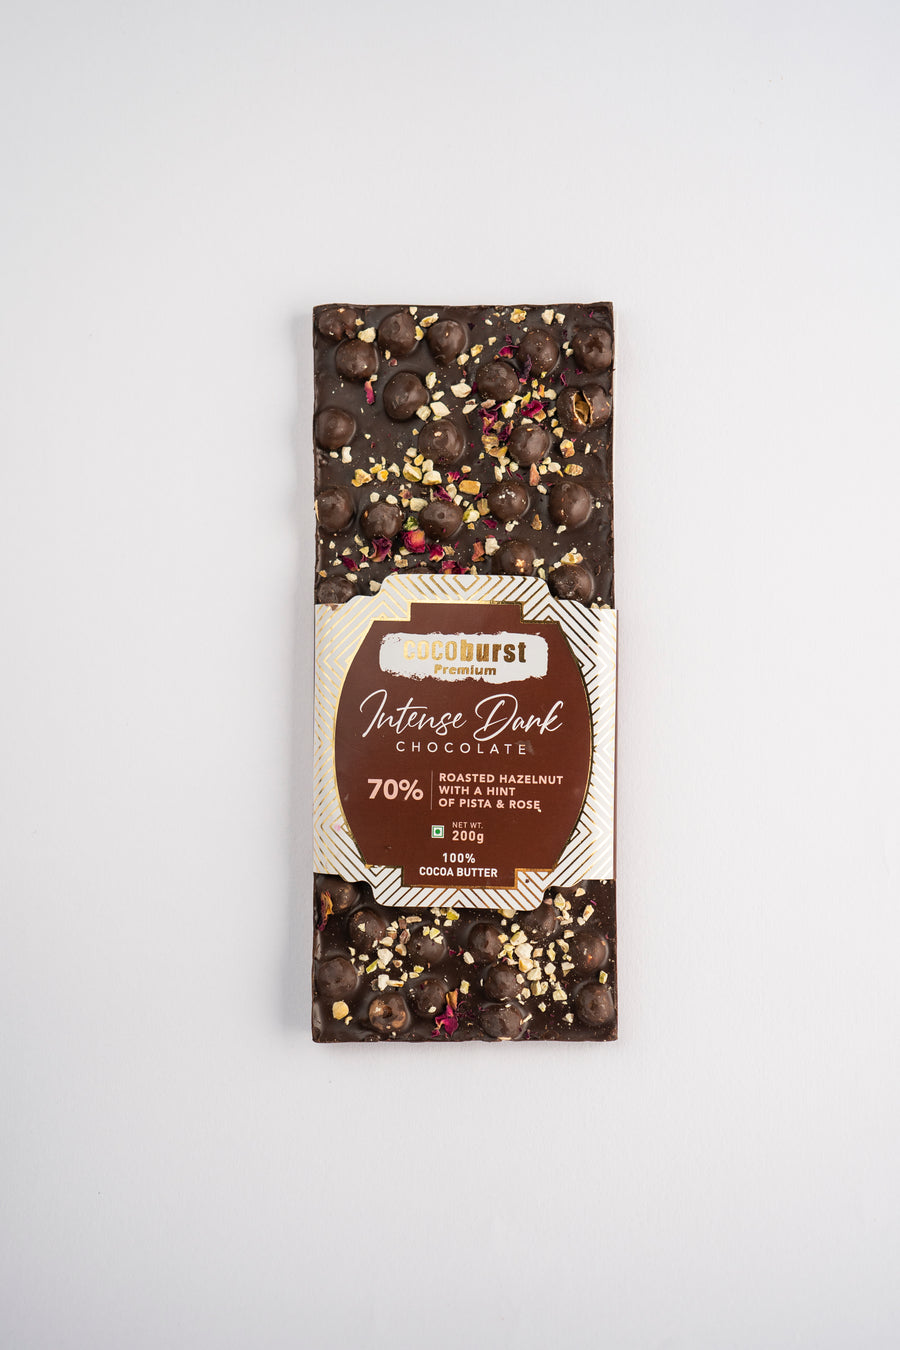 Intense Dark Chocolate with Roasted Hazelnuts with a Hint of Pista & Rose - 200gms